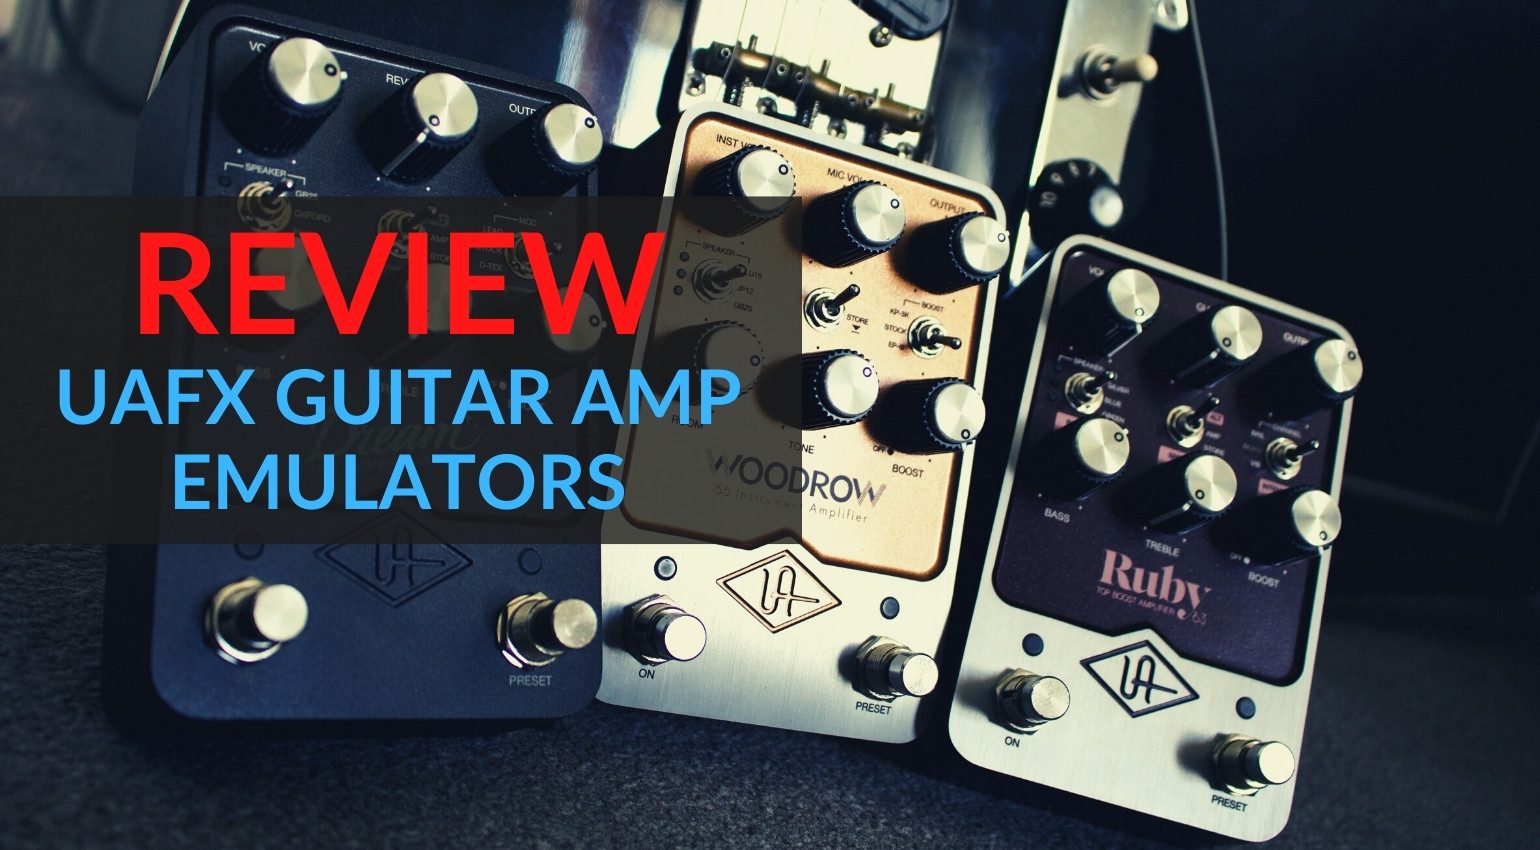 Review: UAFX Ruby, Woodrow & Dream amp sim pedals from Universal